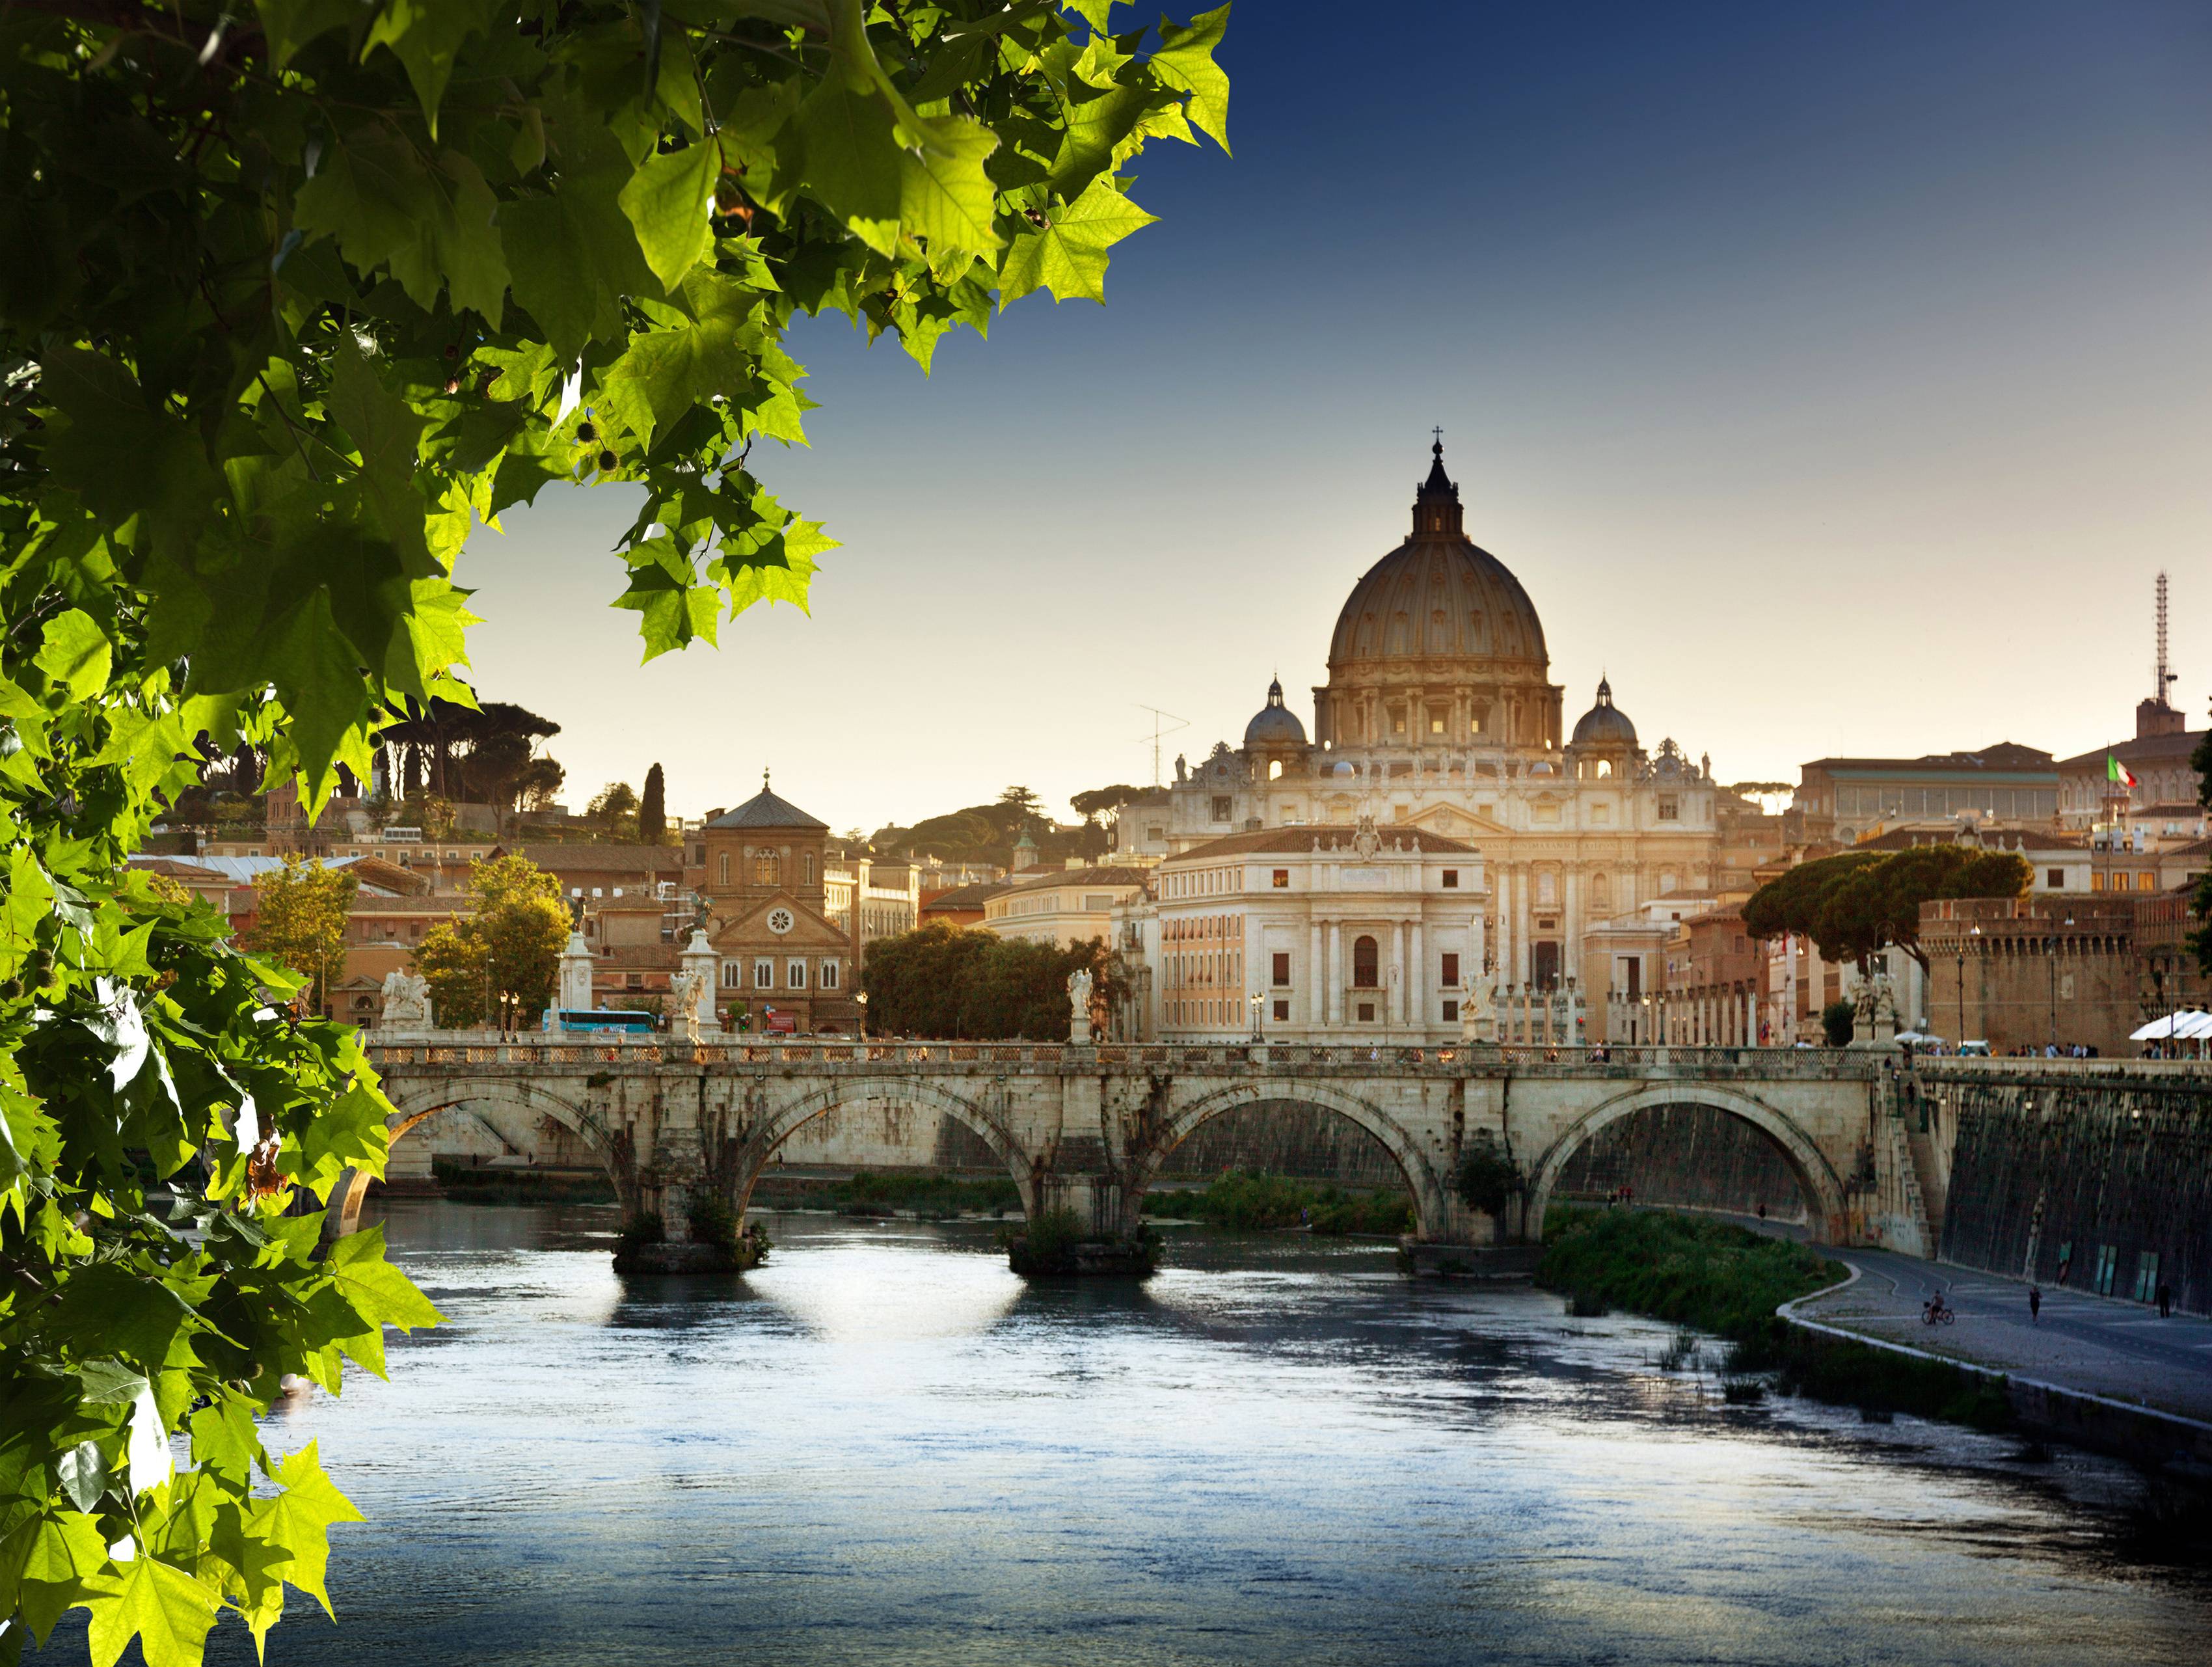 Old town, Leaves, Bridge, cathedral, Vatican wallpaper and image